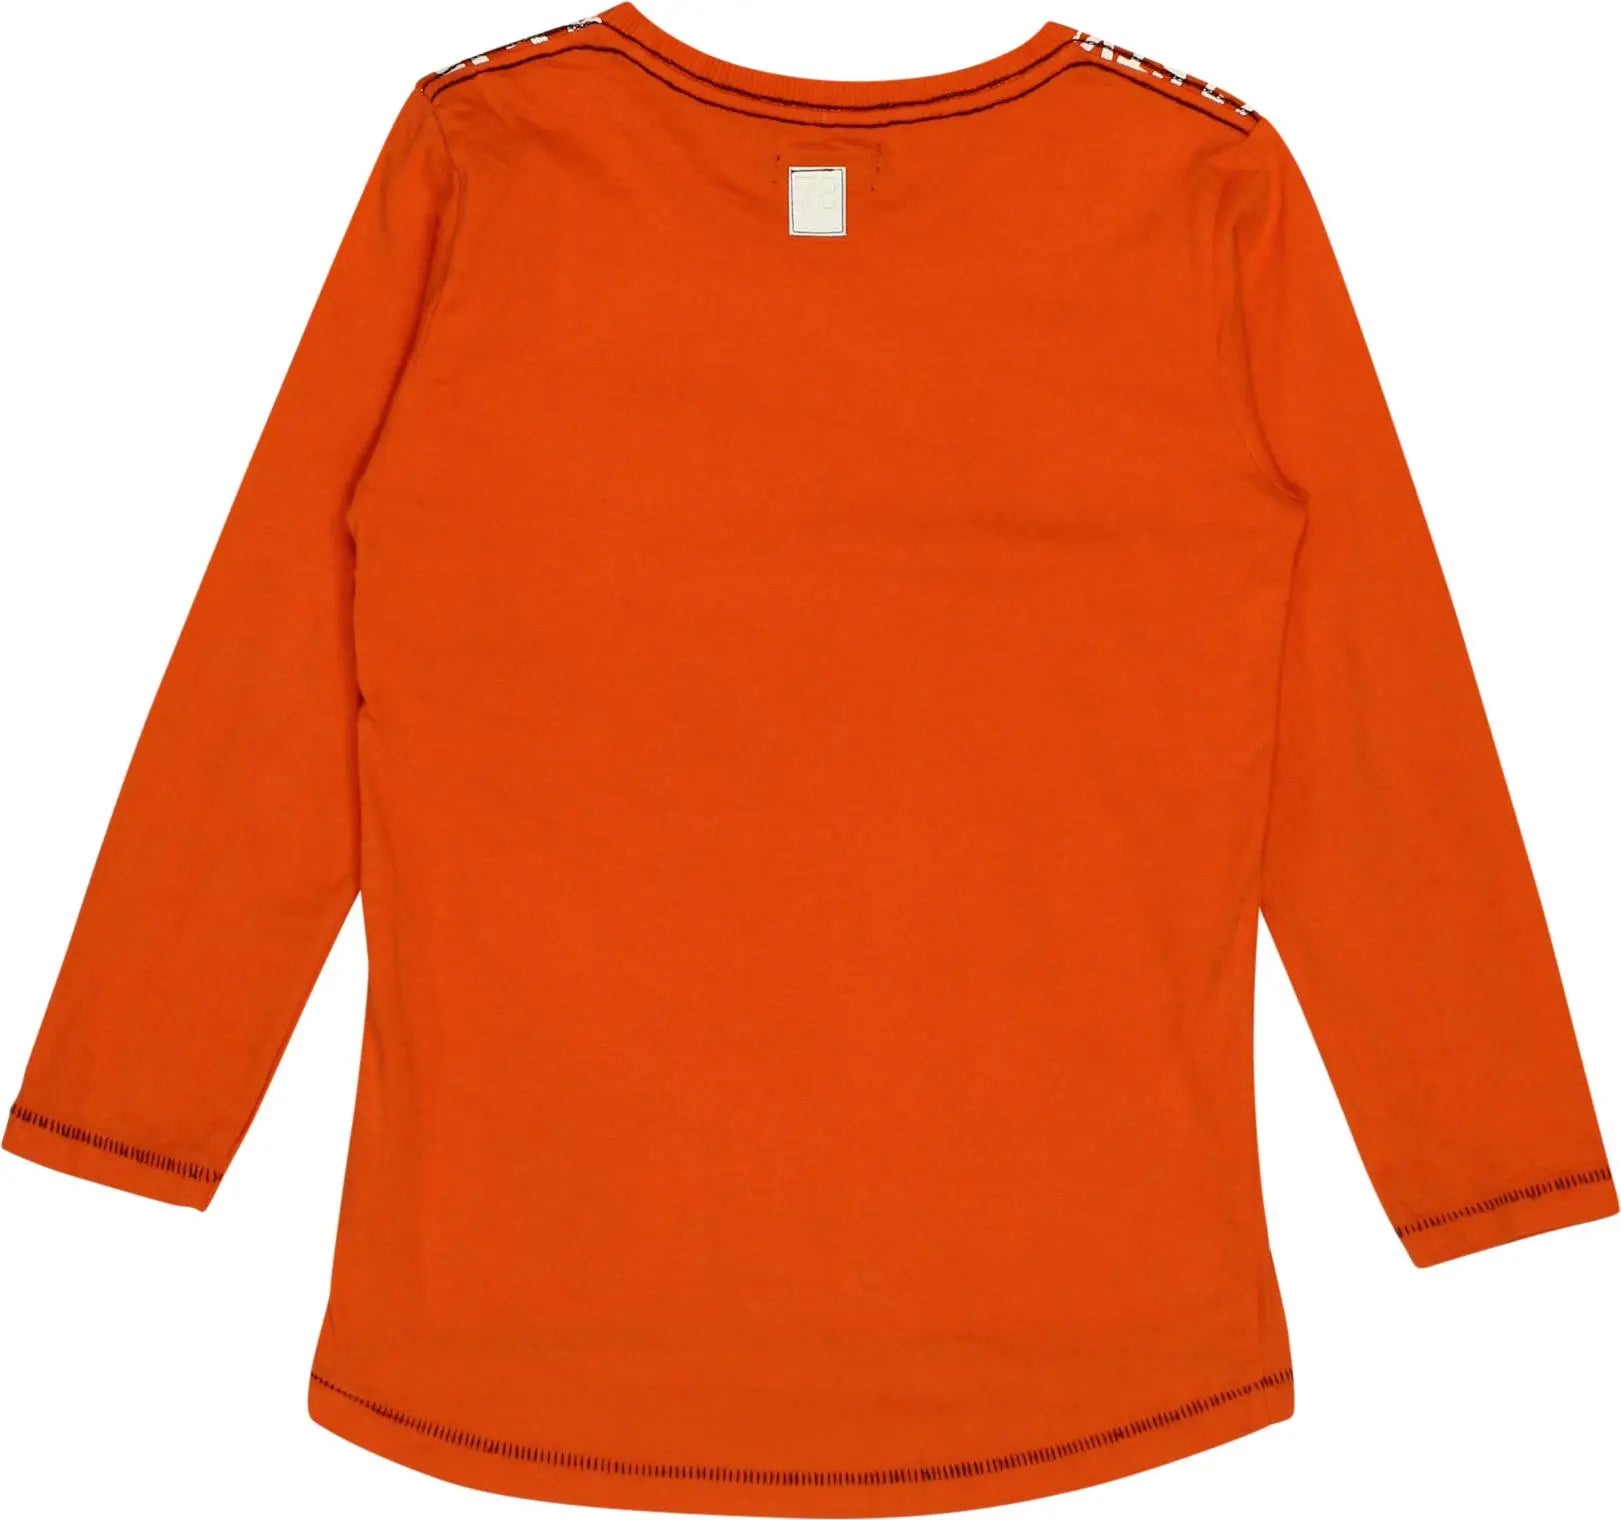 Europe Kids - Long Sleeve Shirt- ThriftTale.com - Vintage and second handclothing